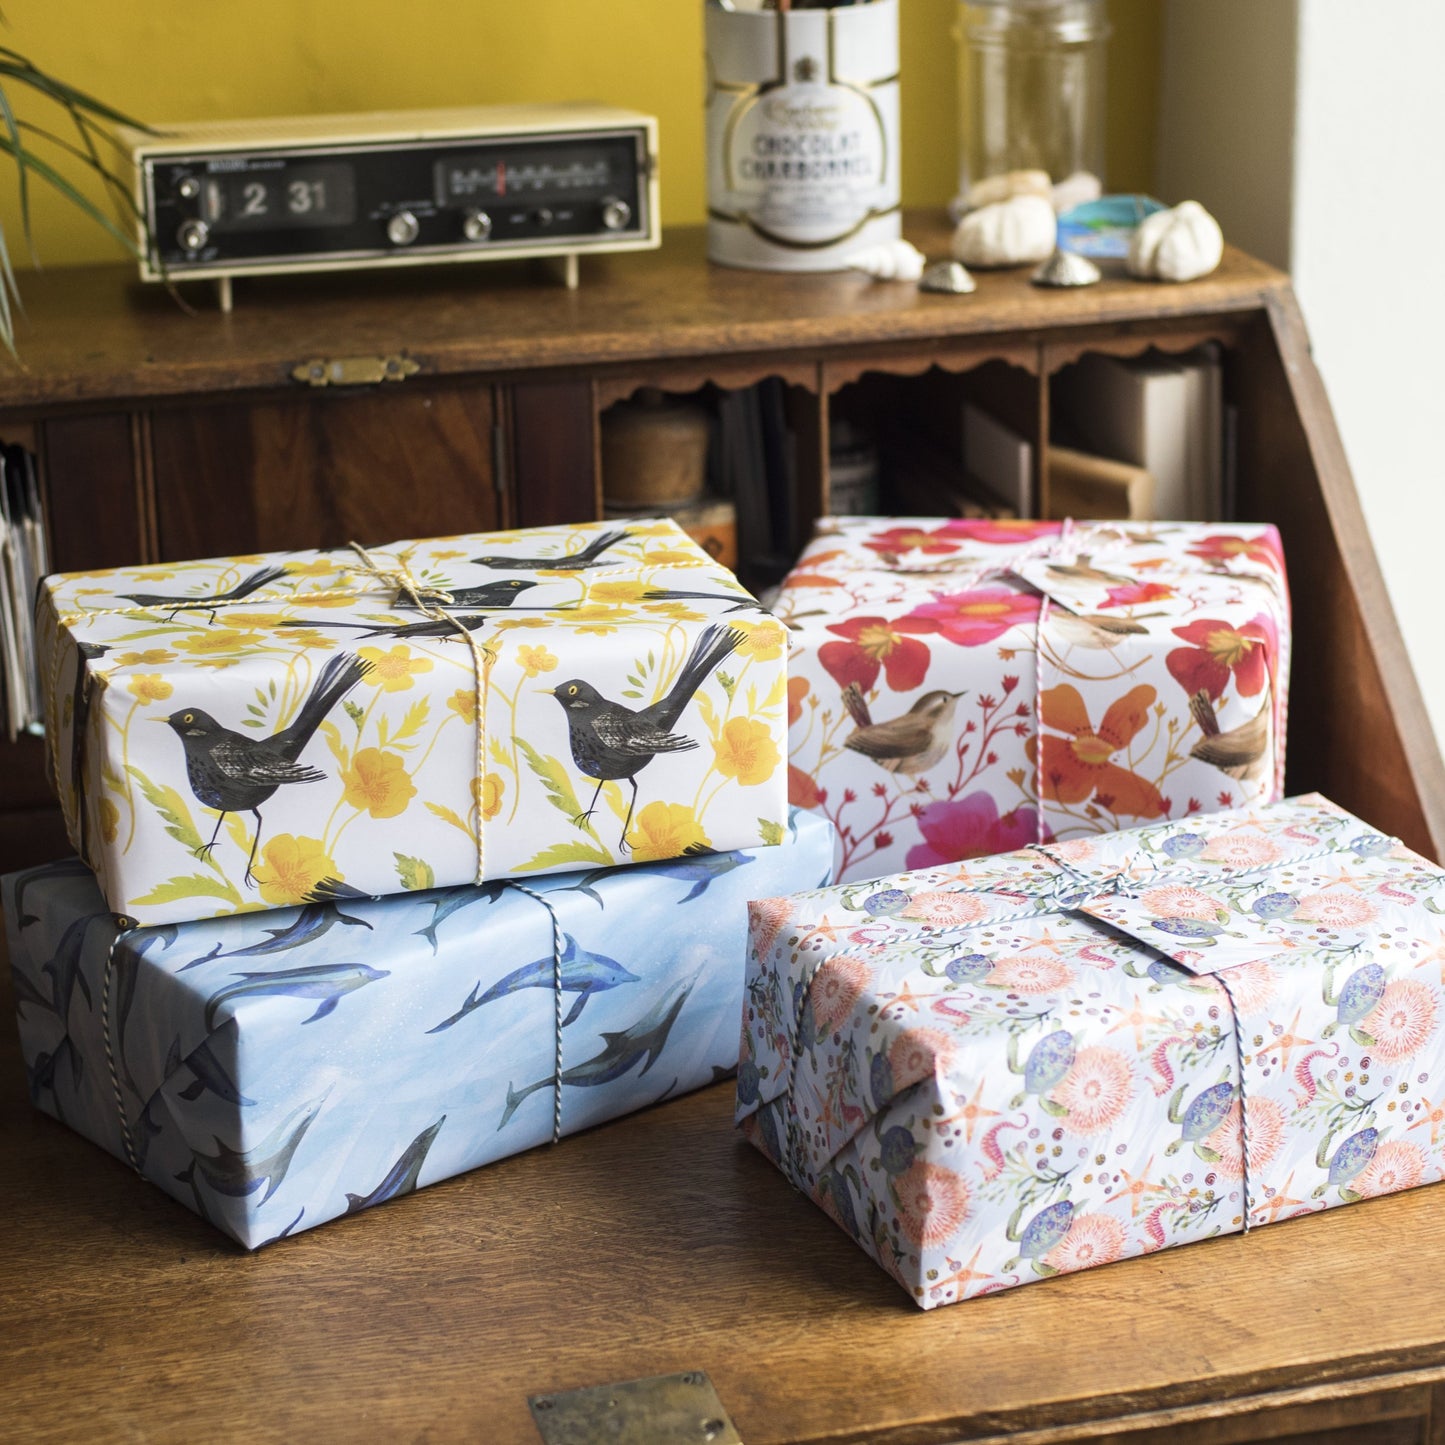 Wrens and Poppies Luxury, 100% Recycled Wrapping Paper